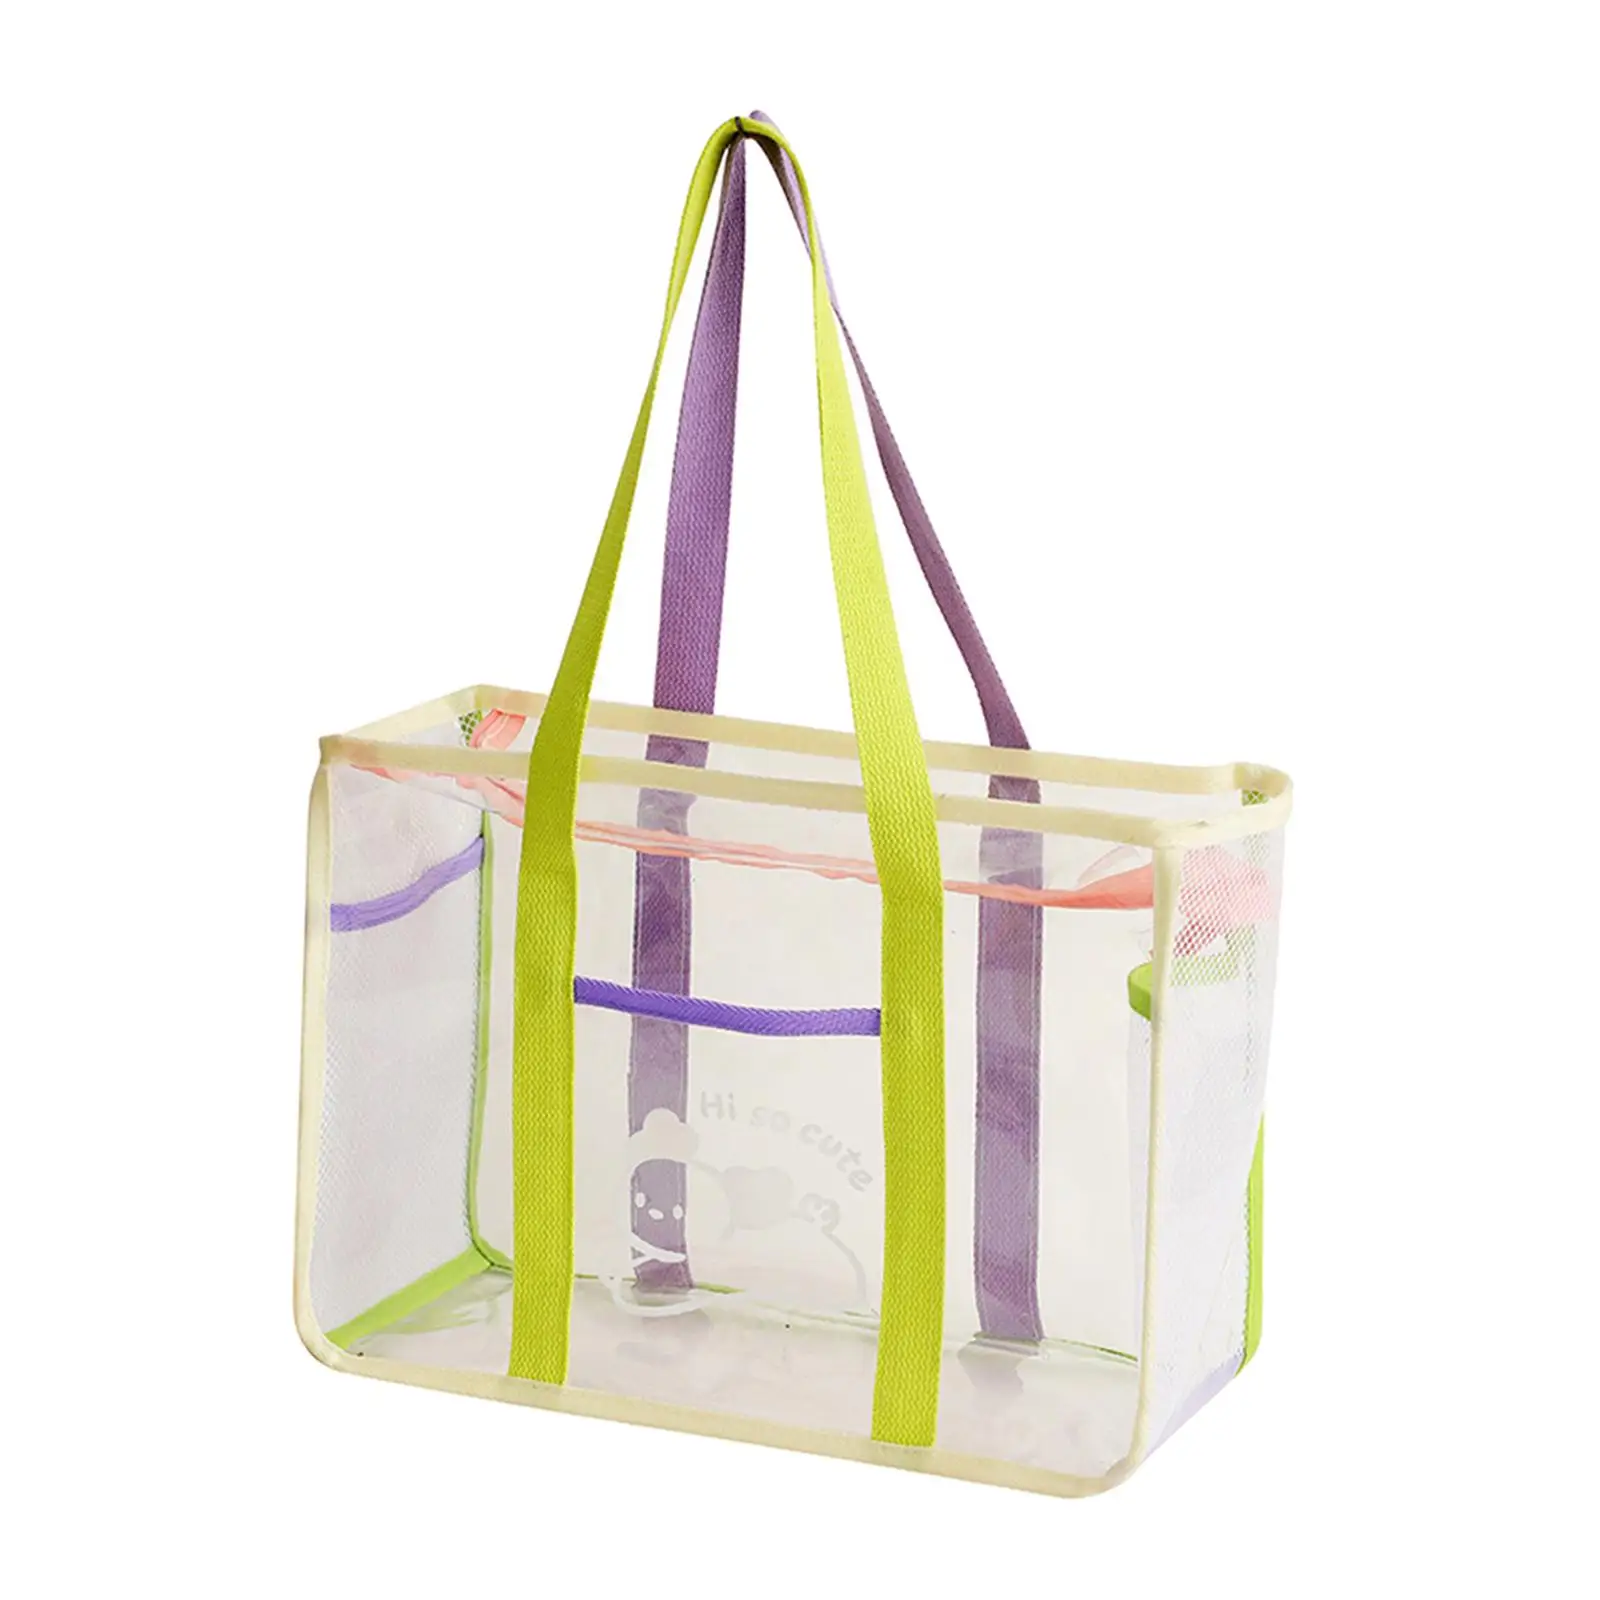 Transparent Bag Durable Pouch Travel Bags Stylish Versatile Girls PVC Clear Tote Bag for Swimming Office Vacation Camping Hiking